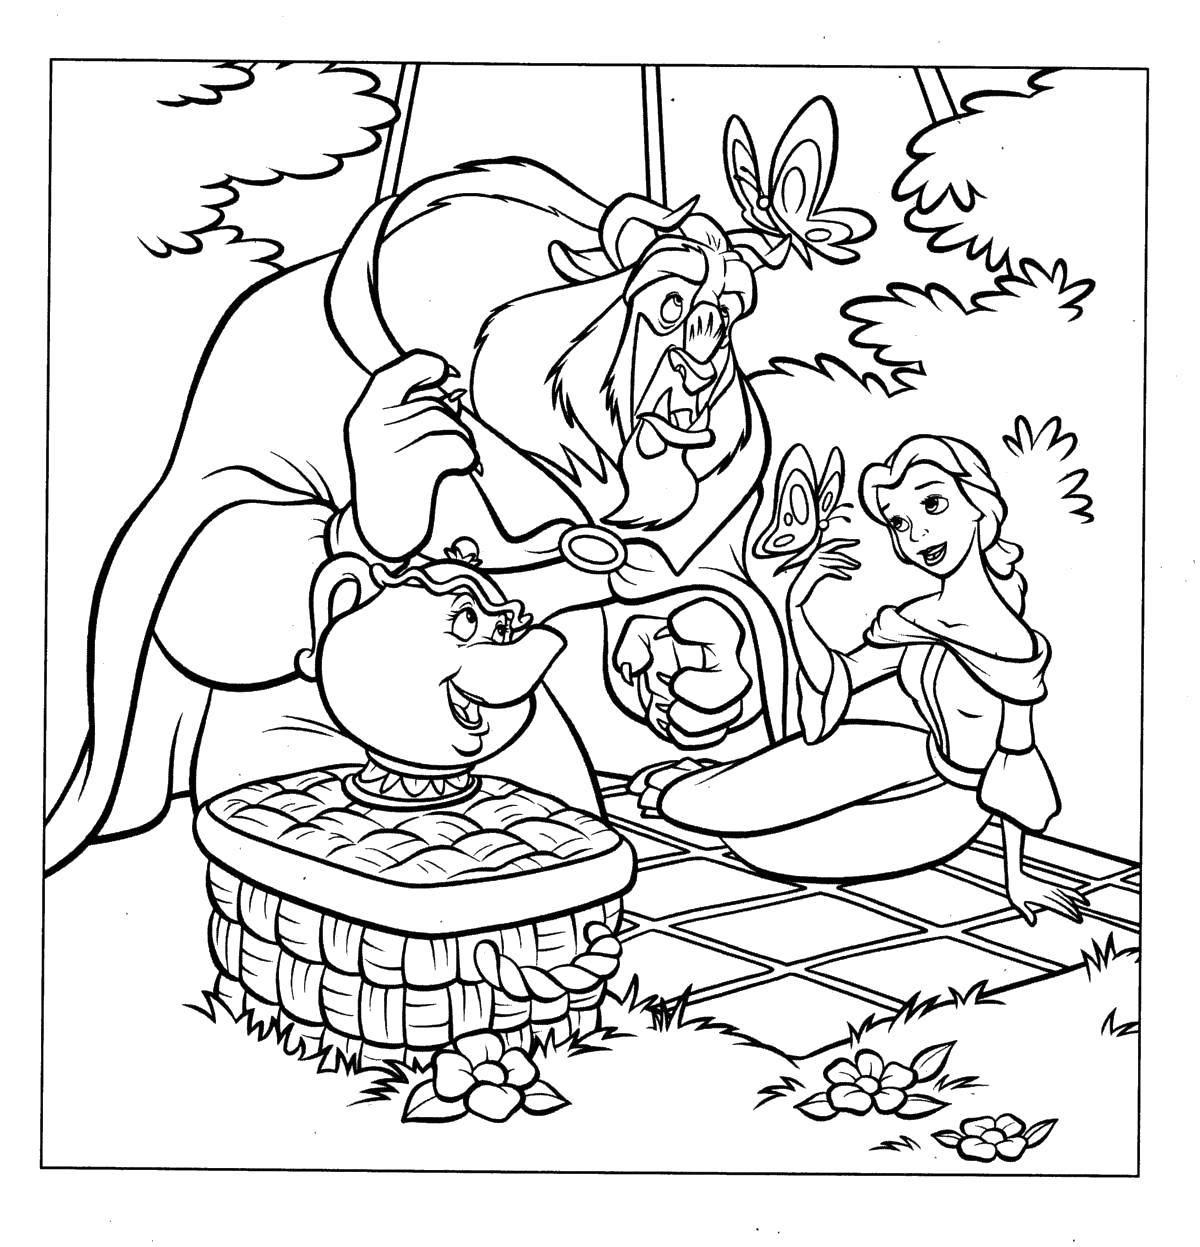 Coloring Beauty and the beast on picnic. Category Disney coloring pages. Tags:  Beauty and the Beast, Disney.